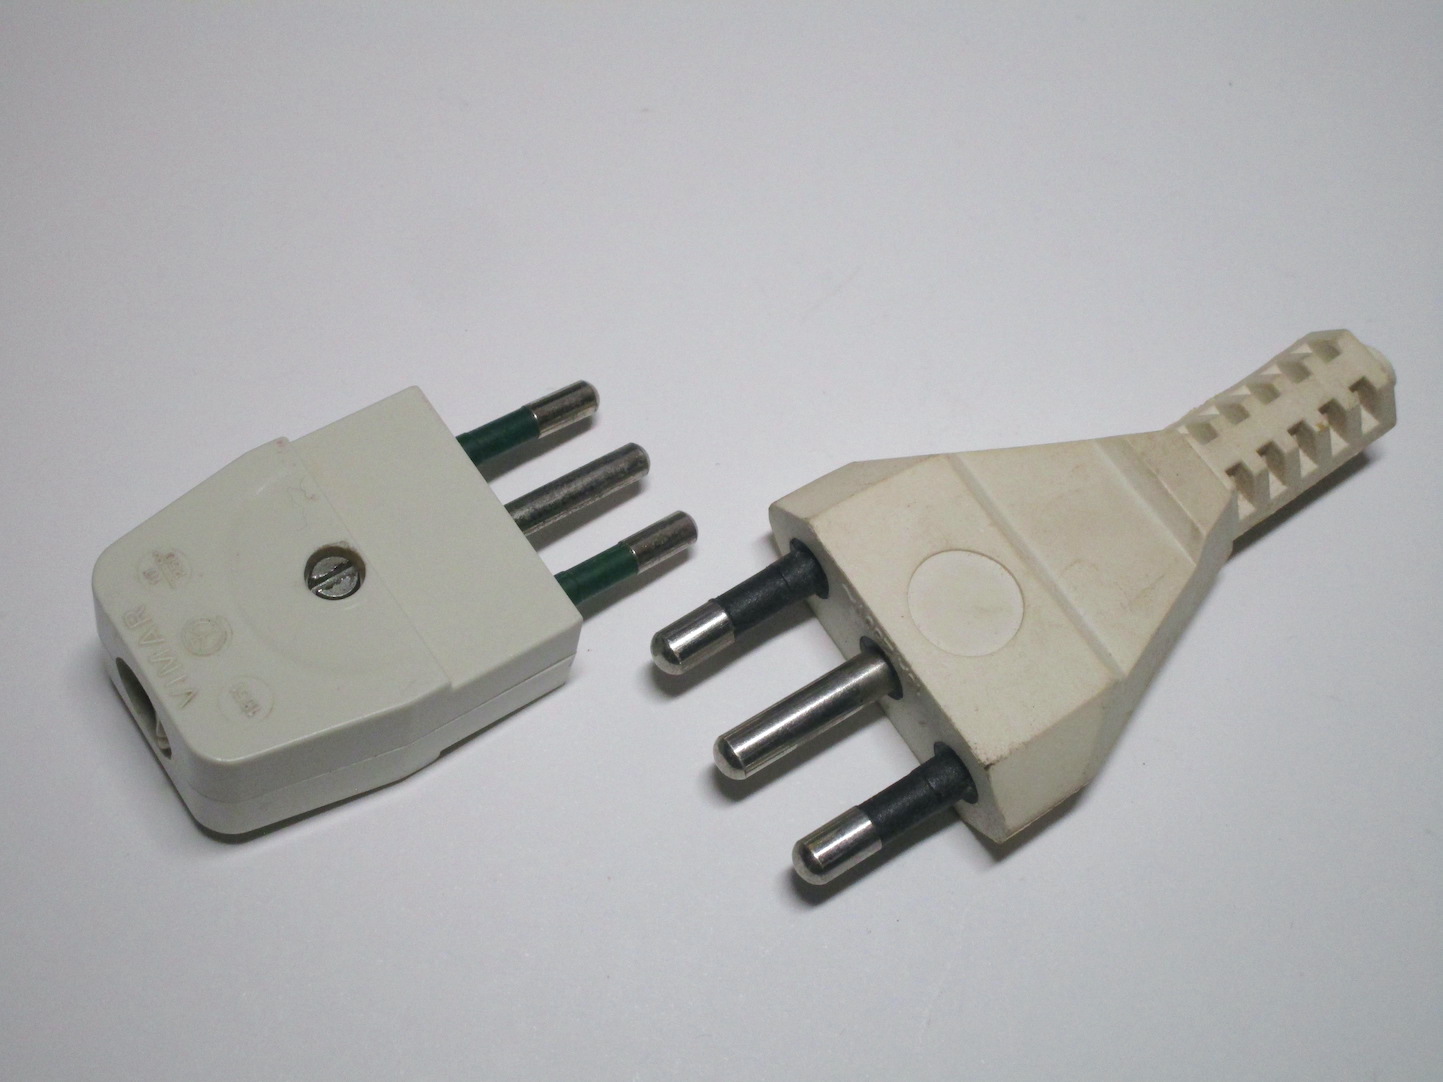 An overview of the two different sized of Type L plug.